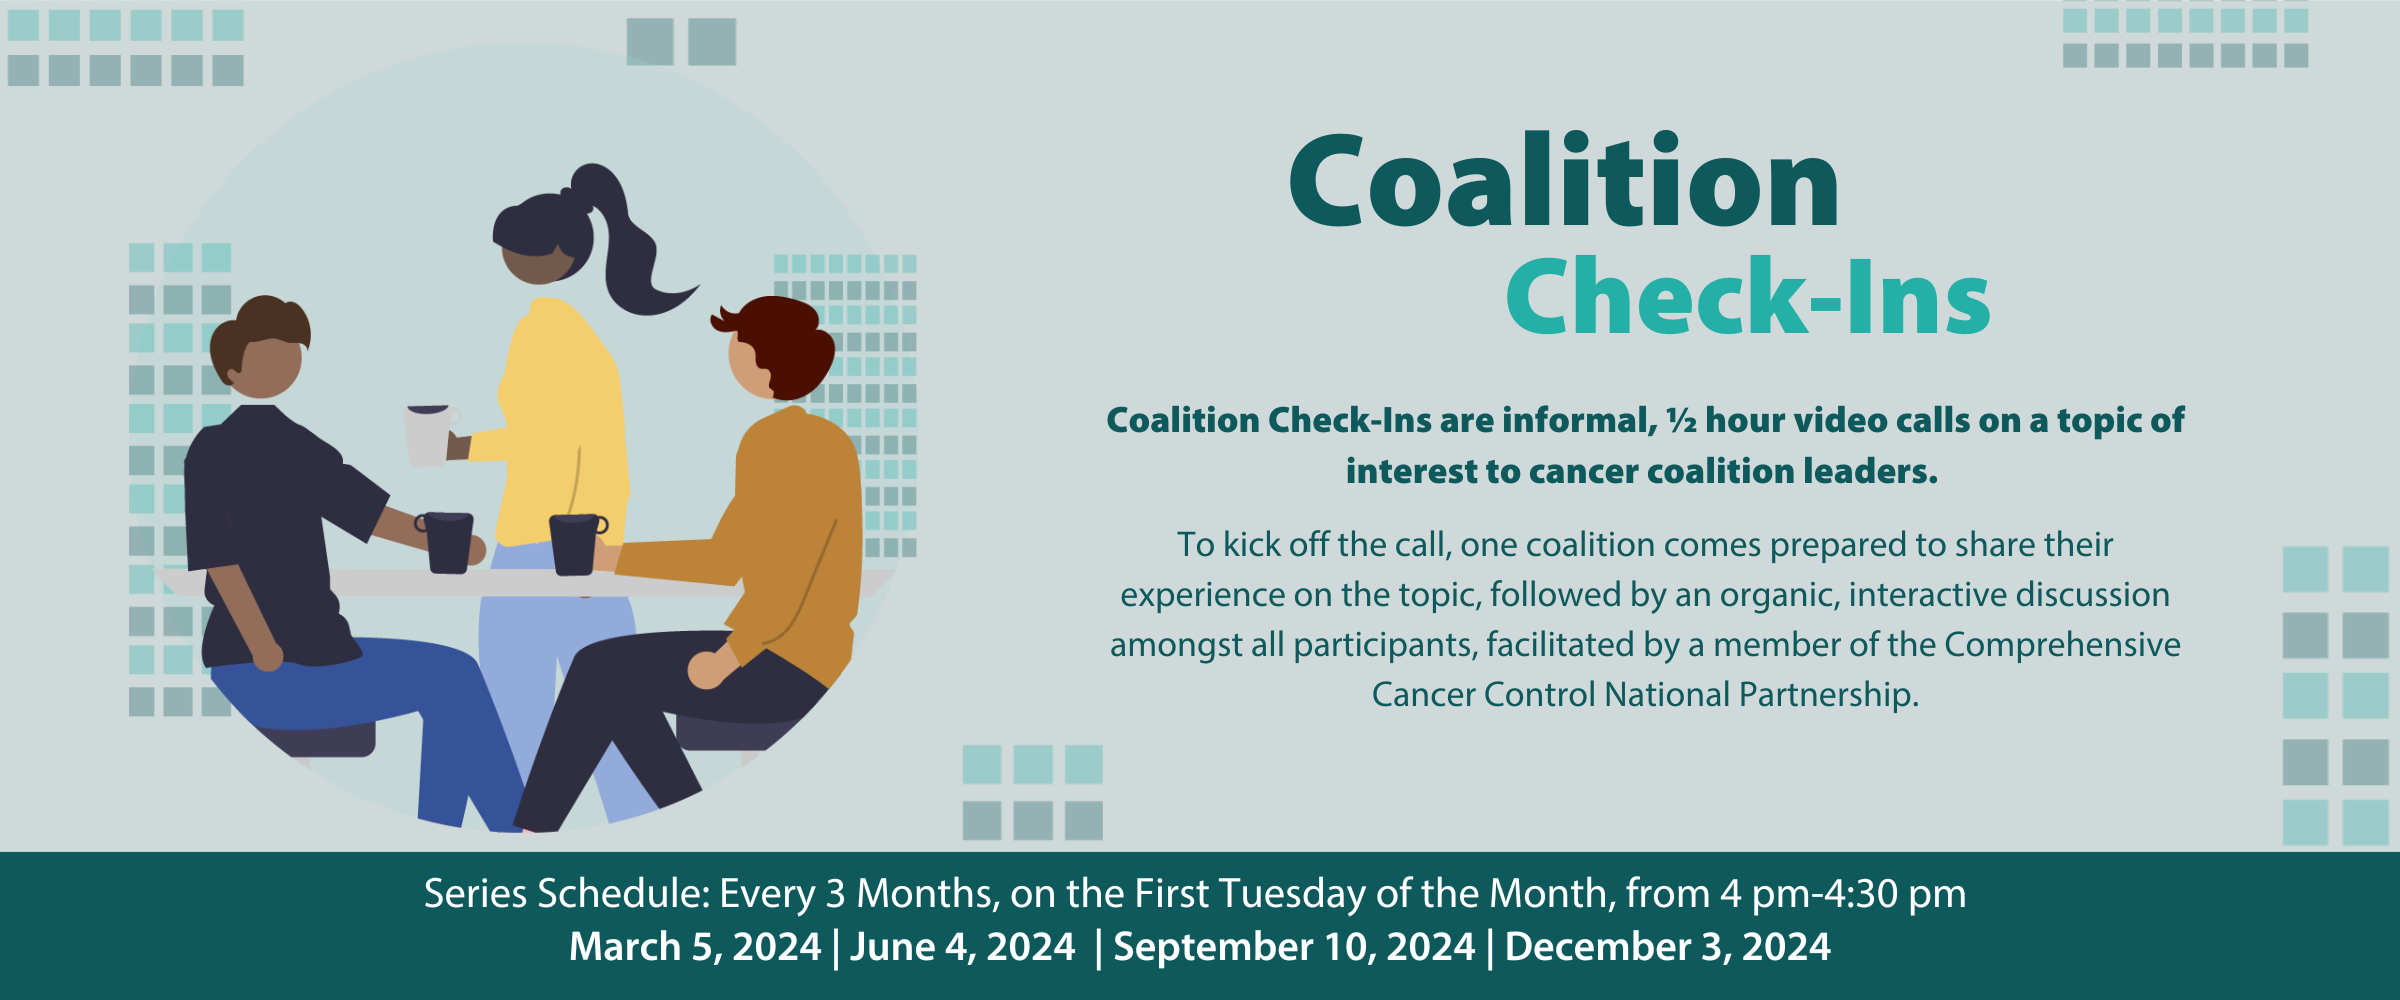 Cancer Coalition Check-Ins link